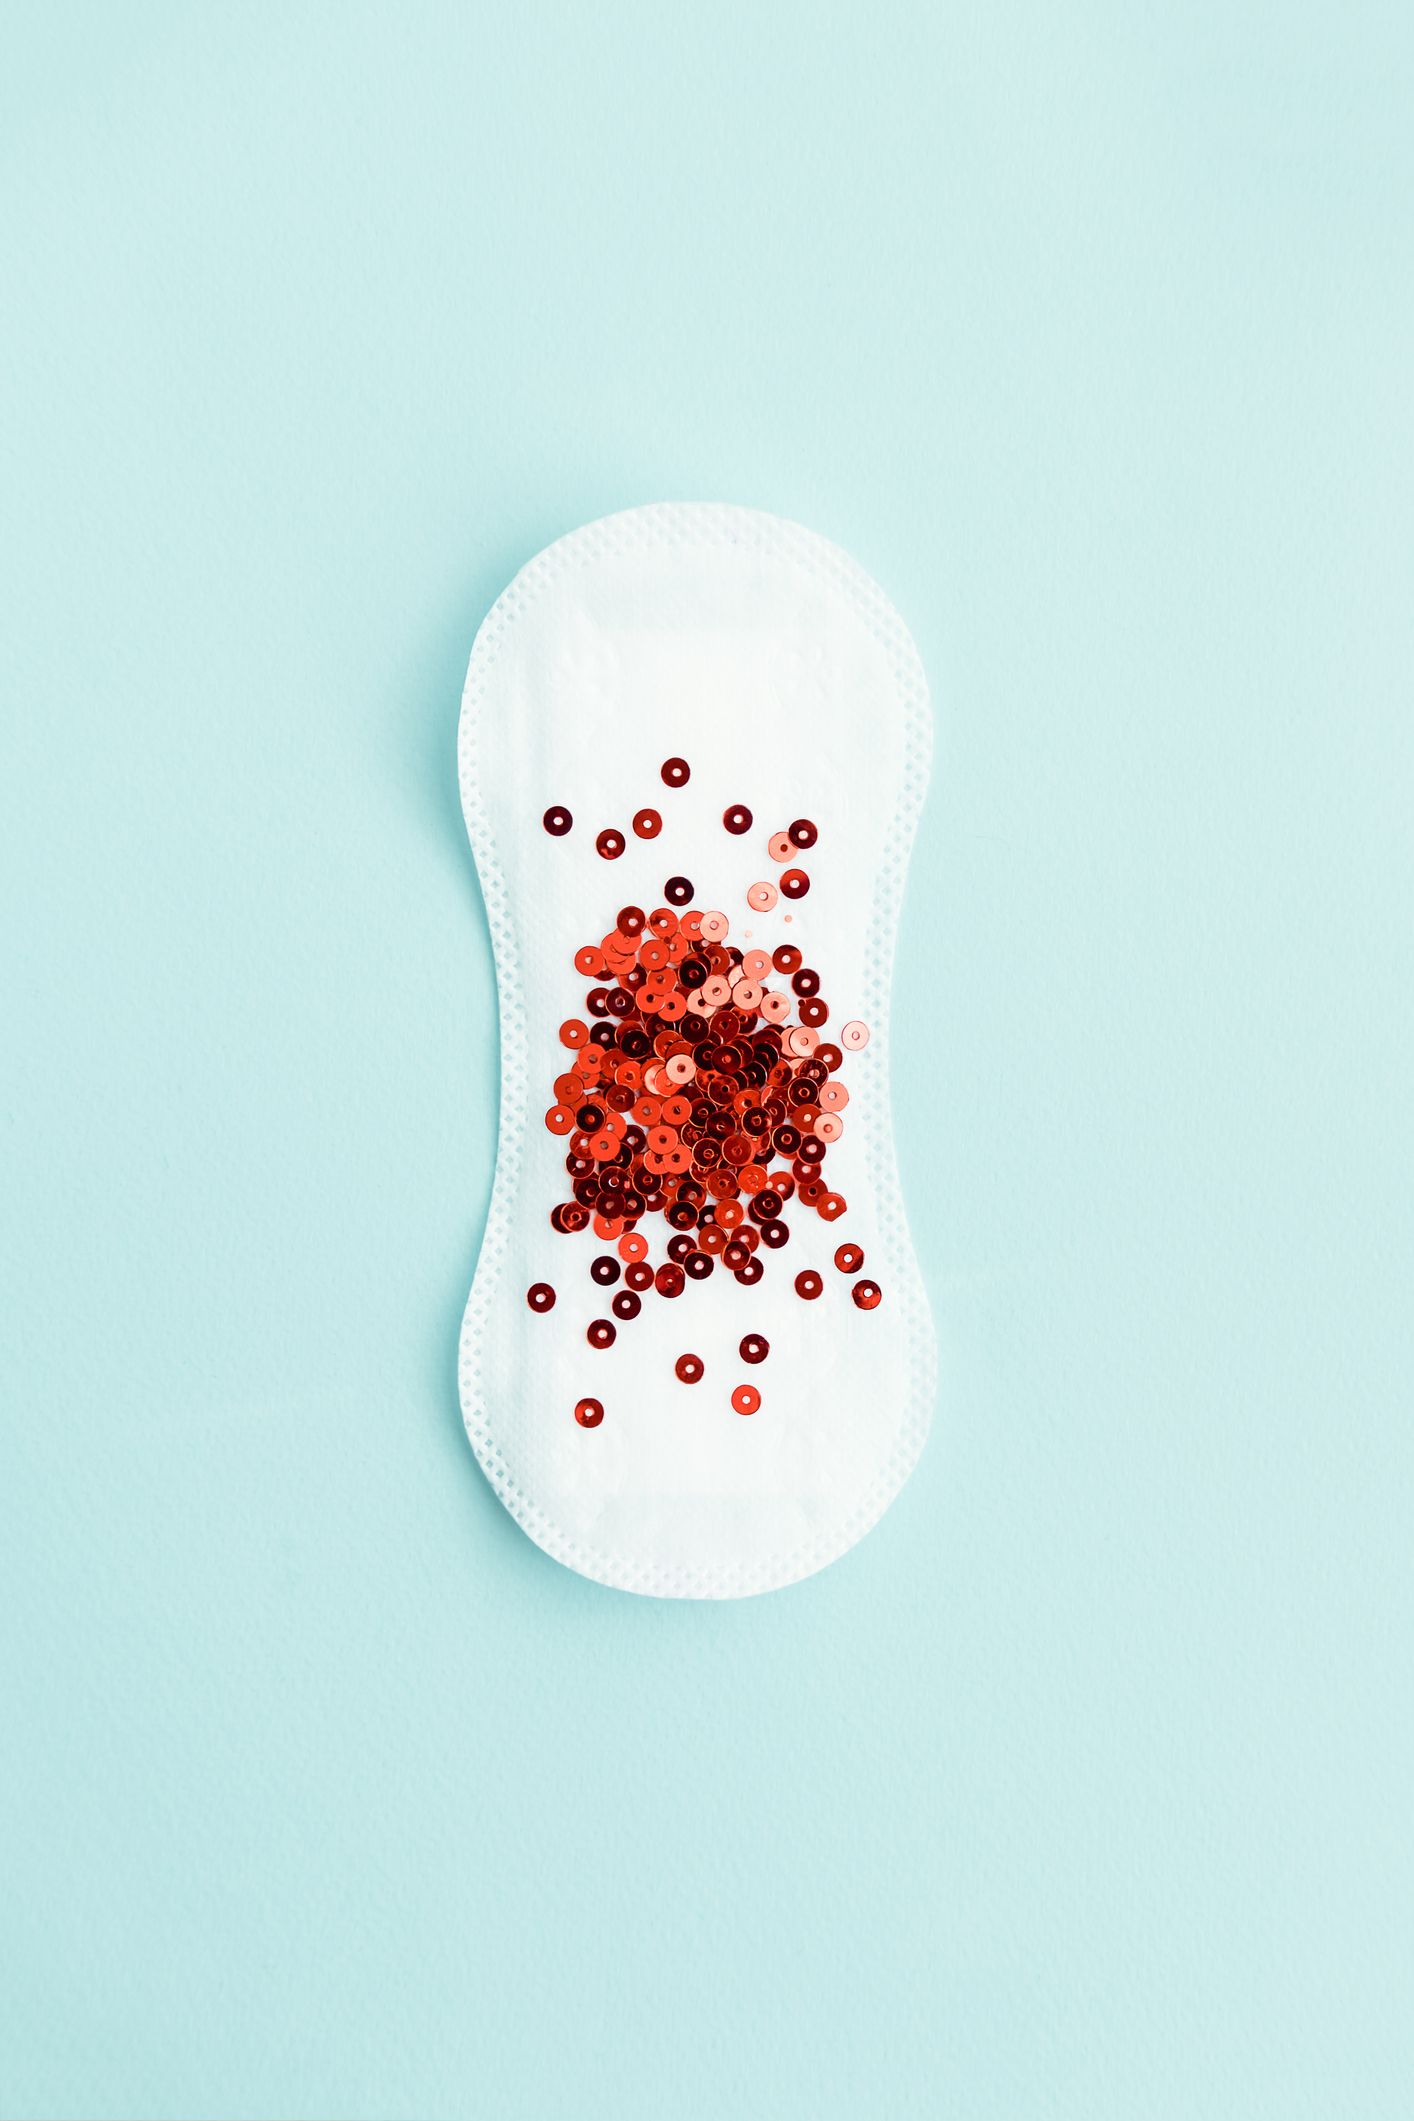 Period Blood Clots: Is This Normal?